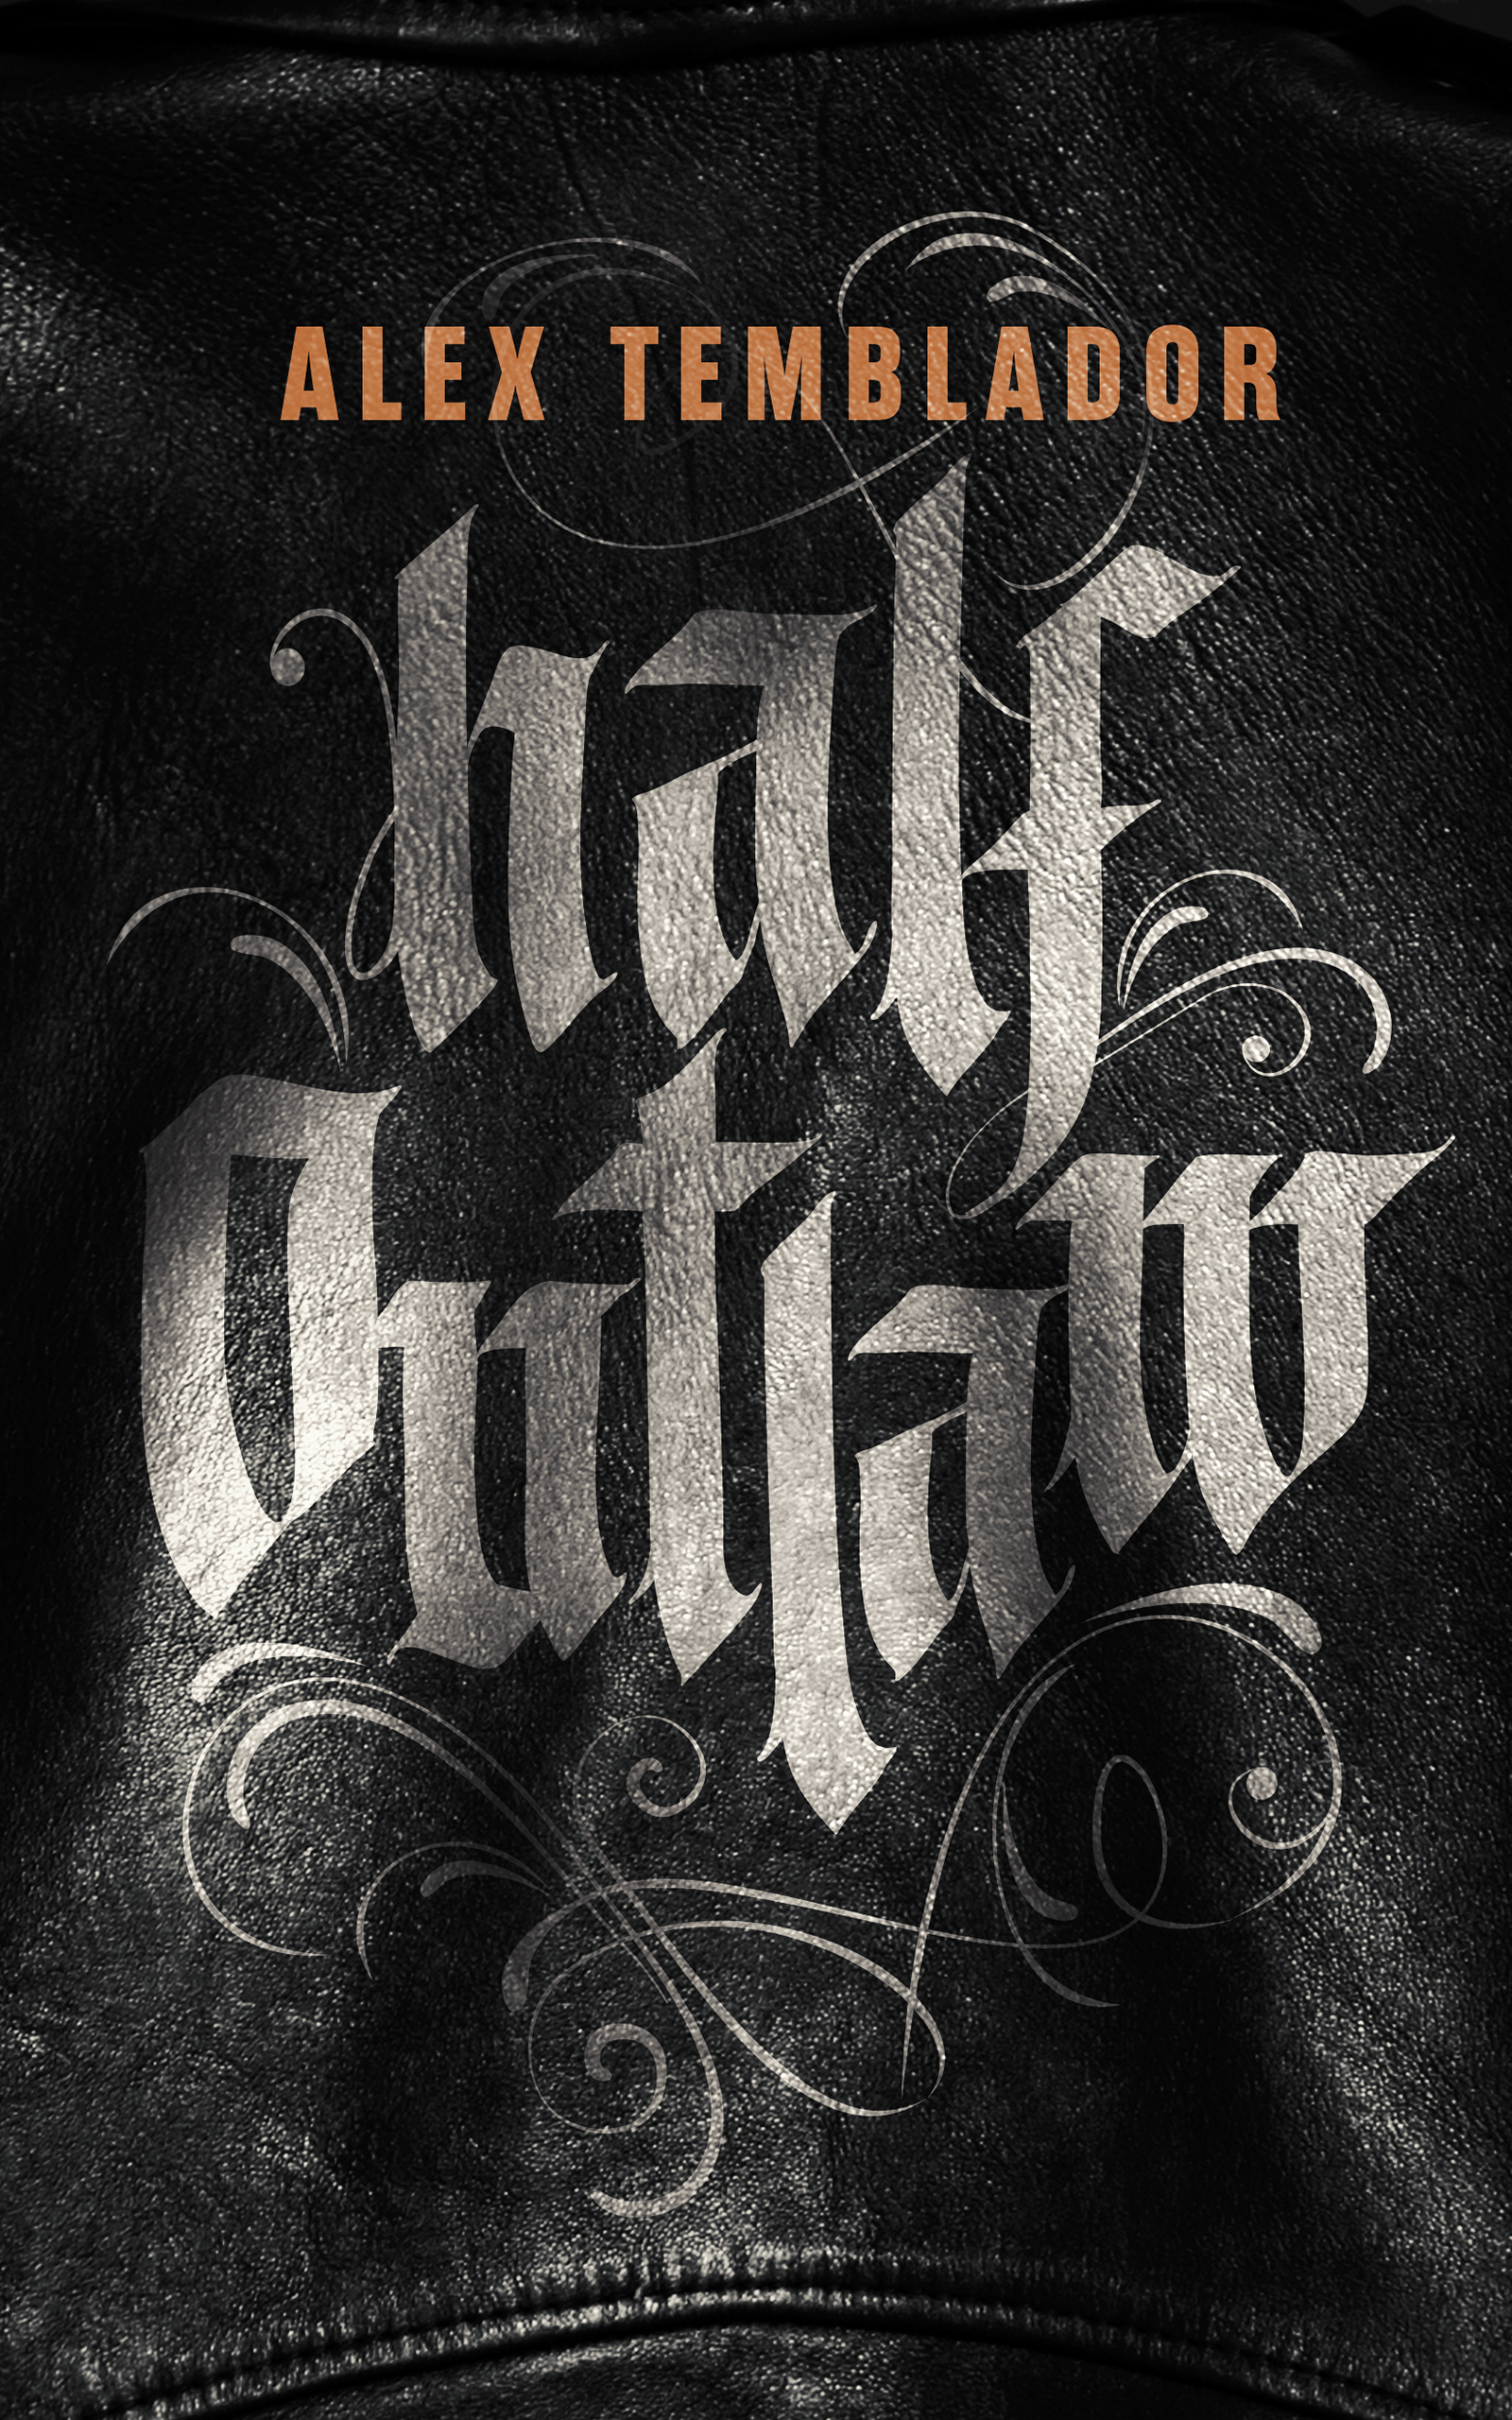 A black and silver book cover reading "half outlaw"